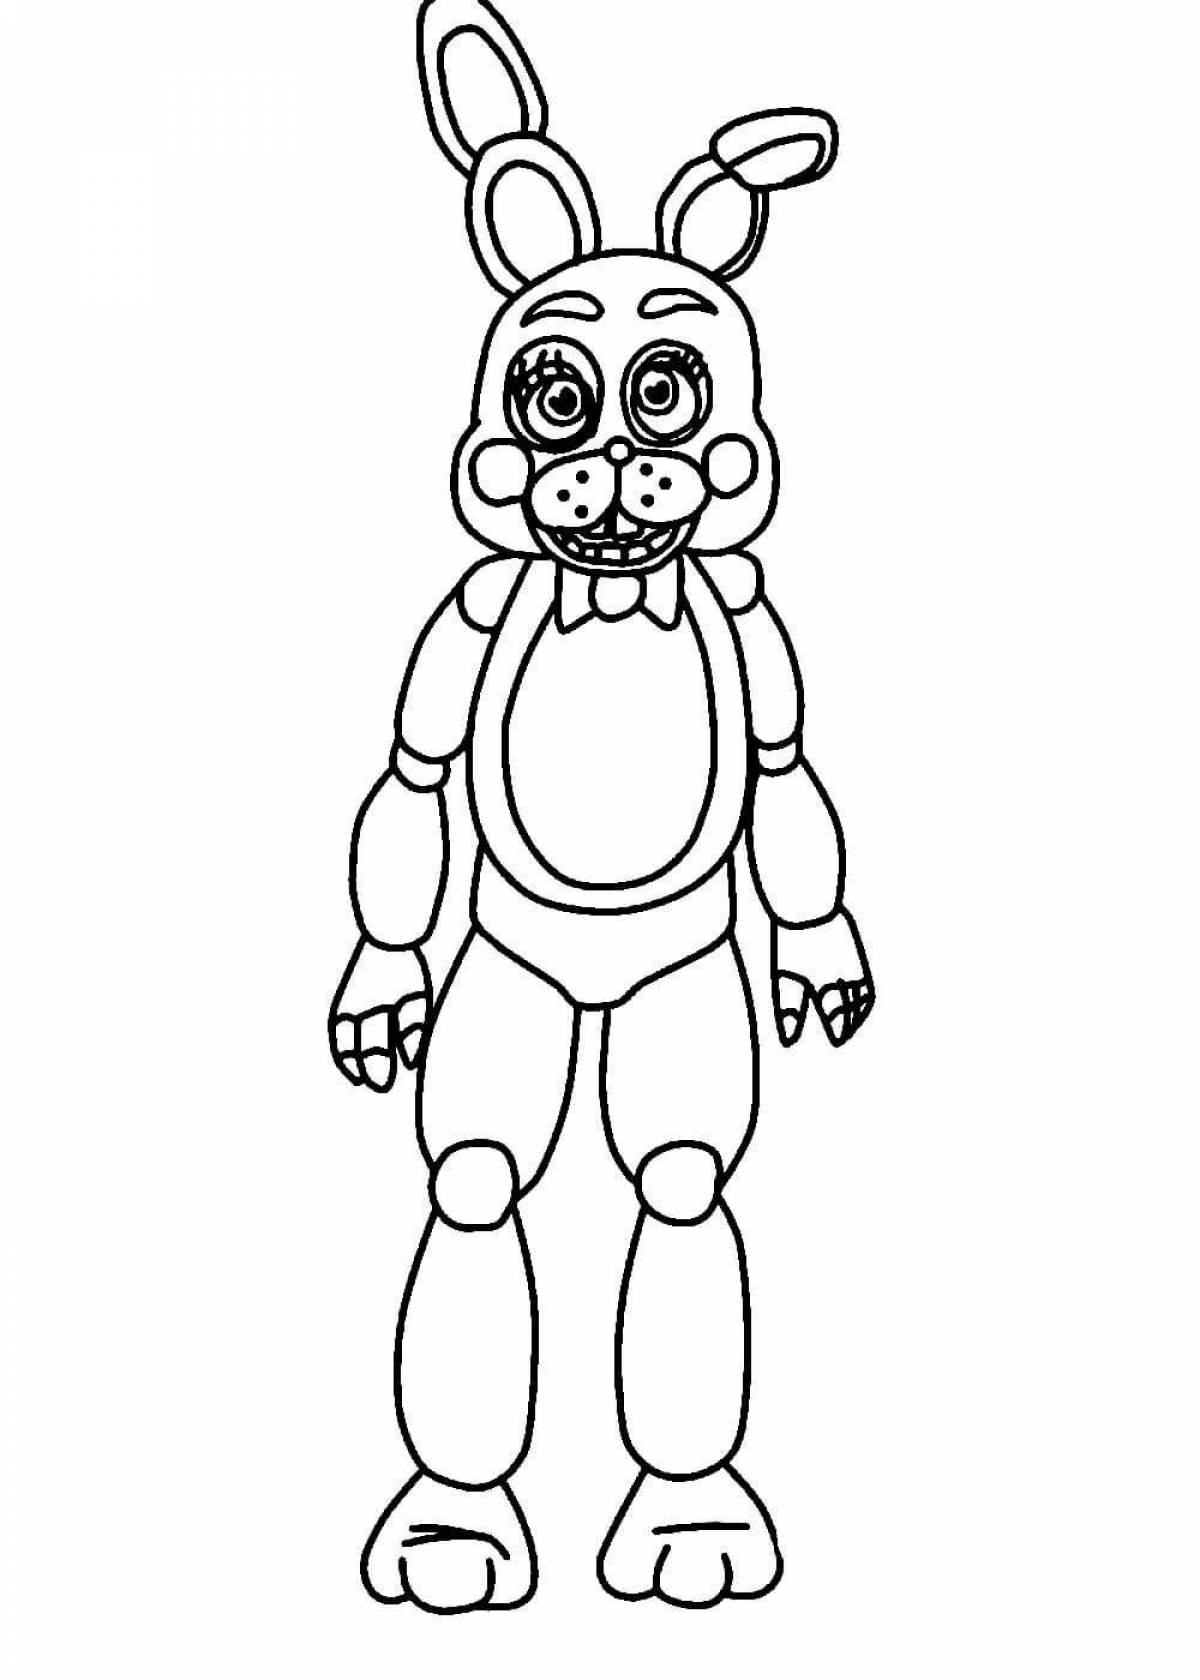 Shining freddy coloring book for kids